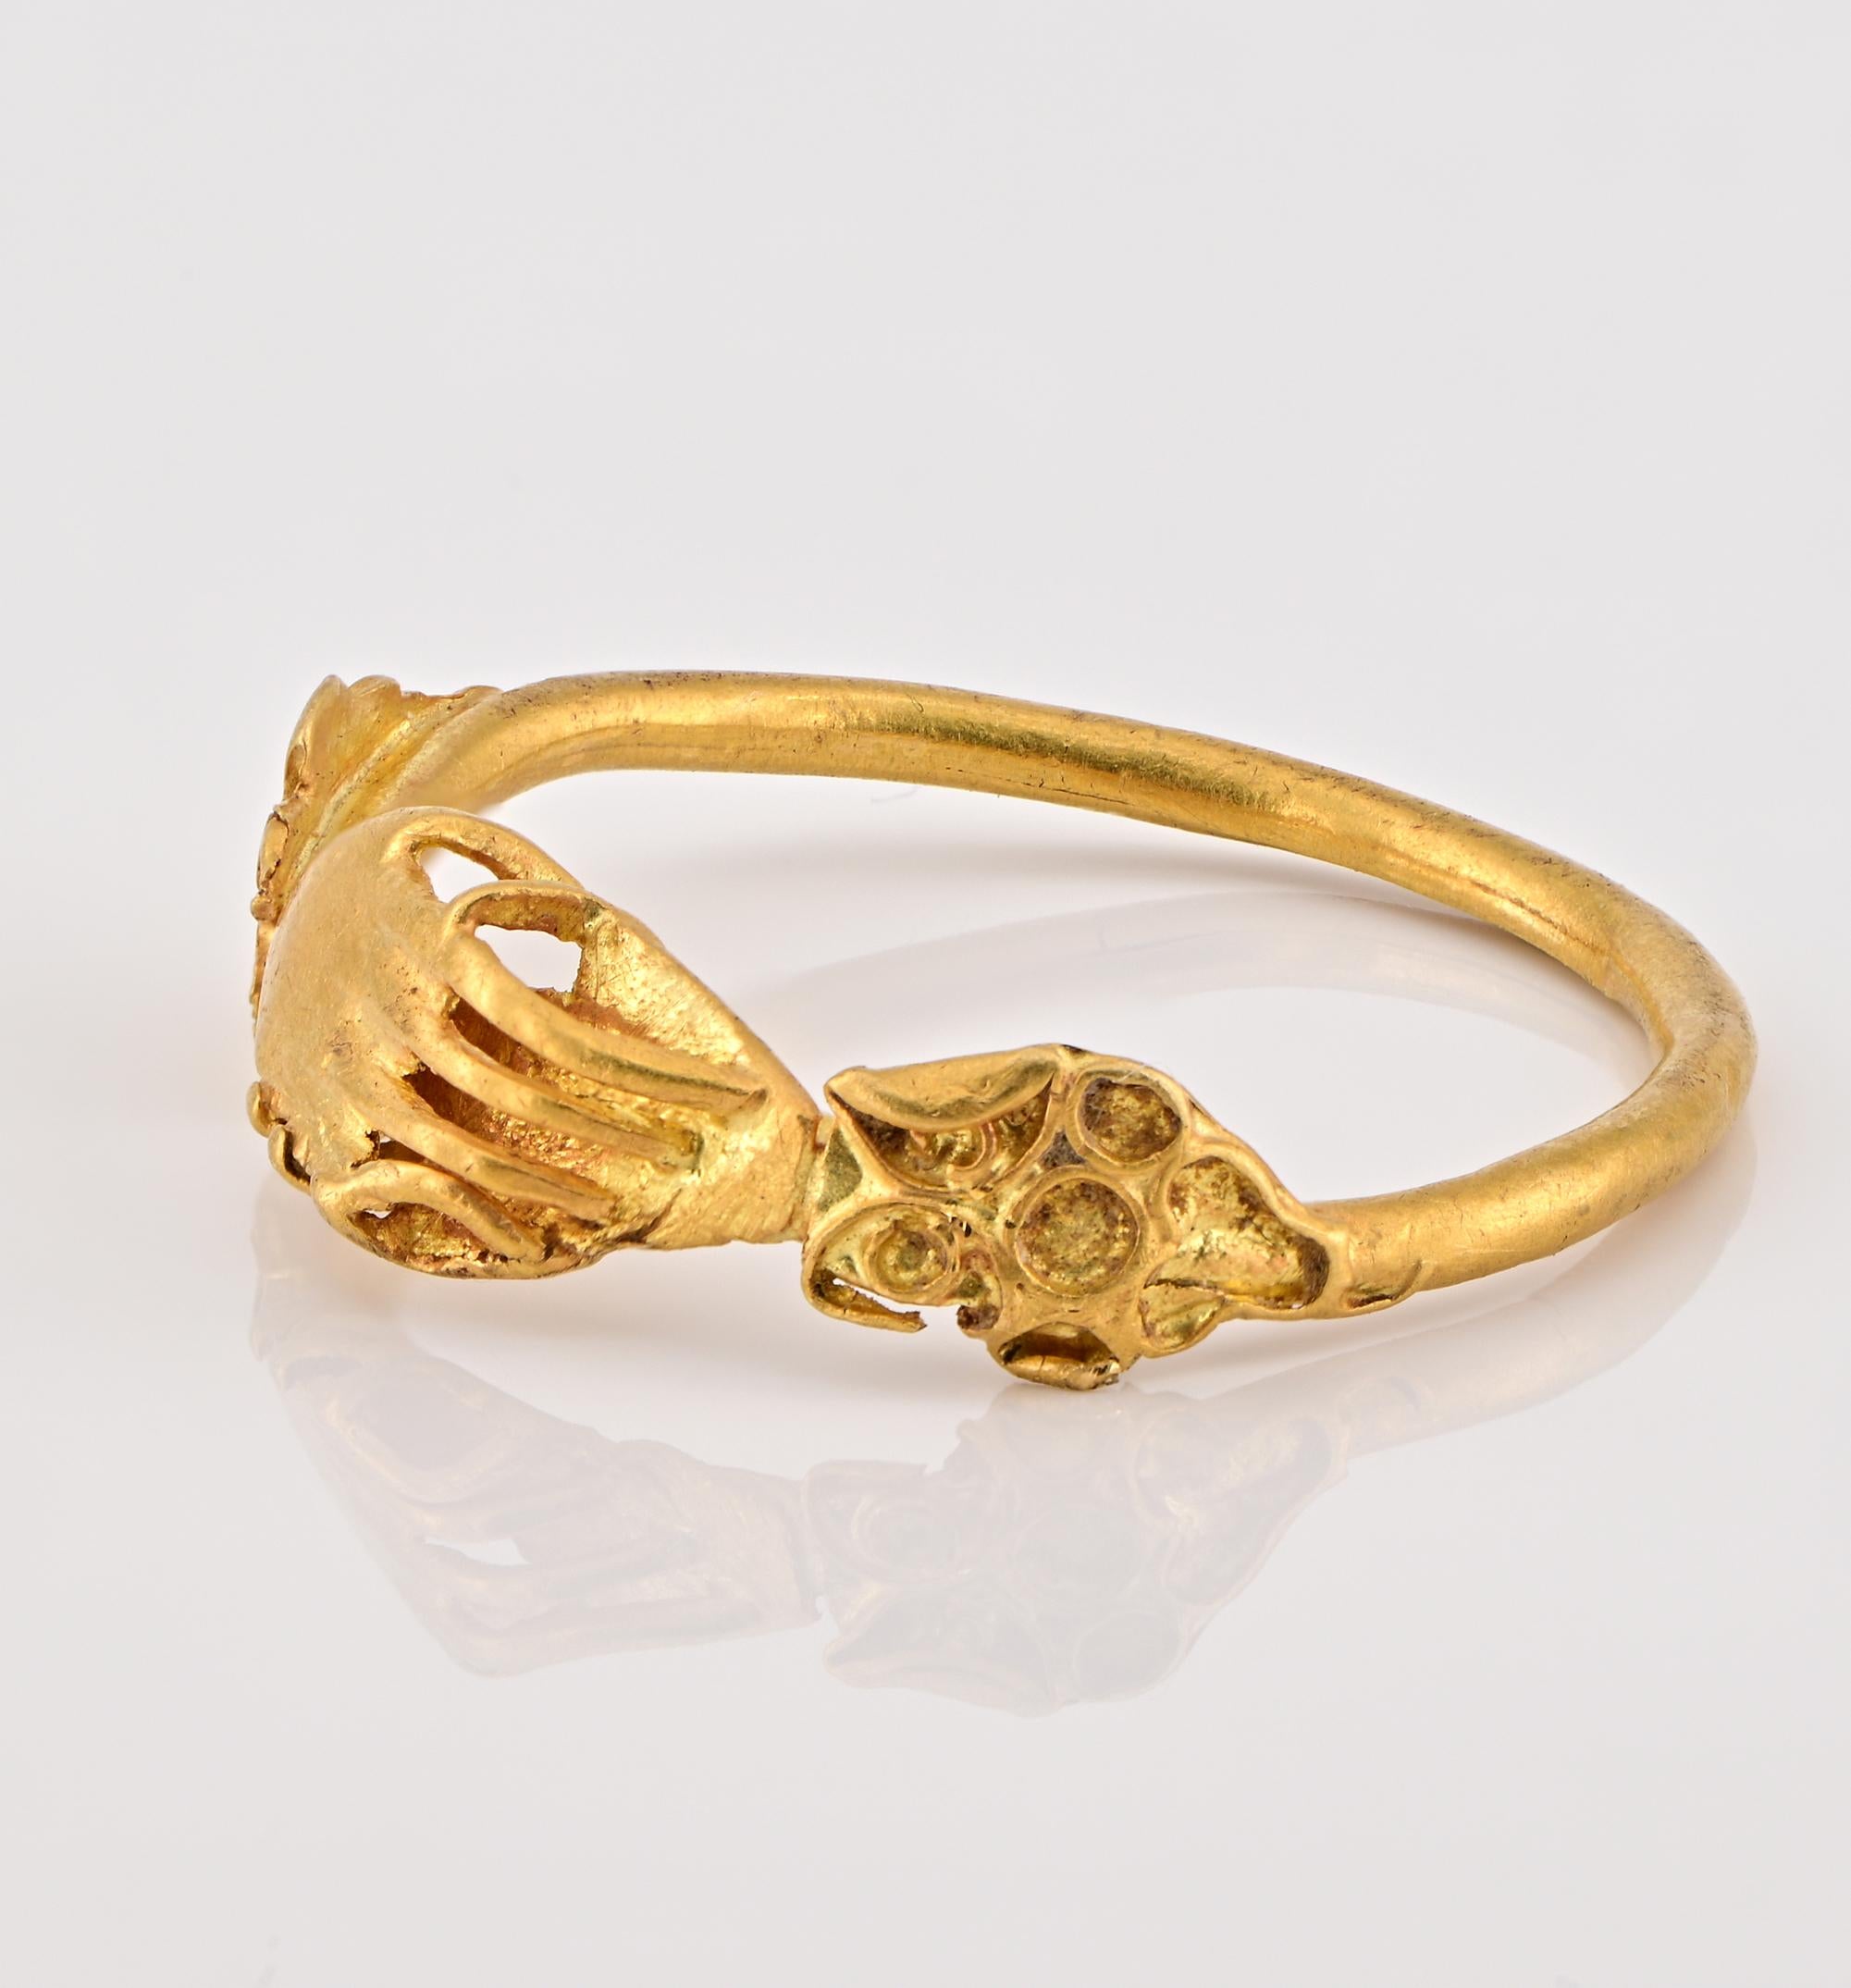 Rare European 14th/15th Century 22/24 Kt Fede Ring For Sale 3